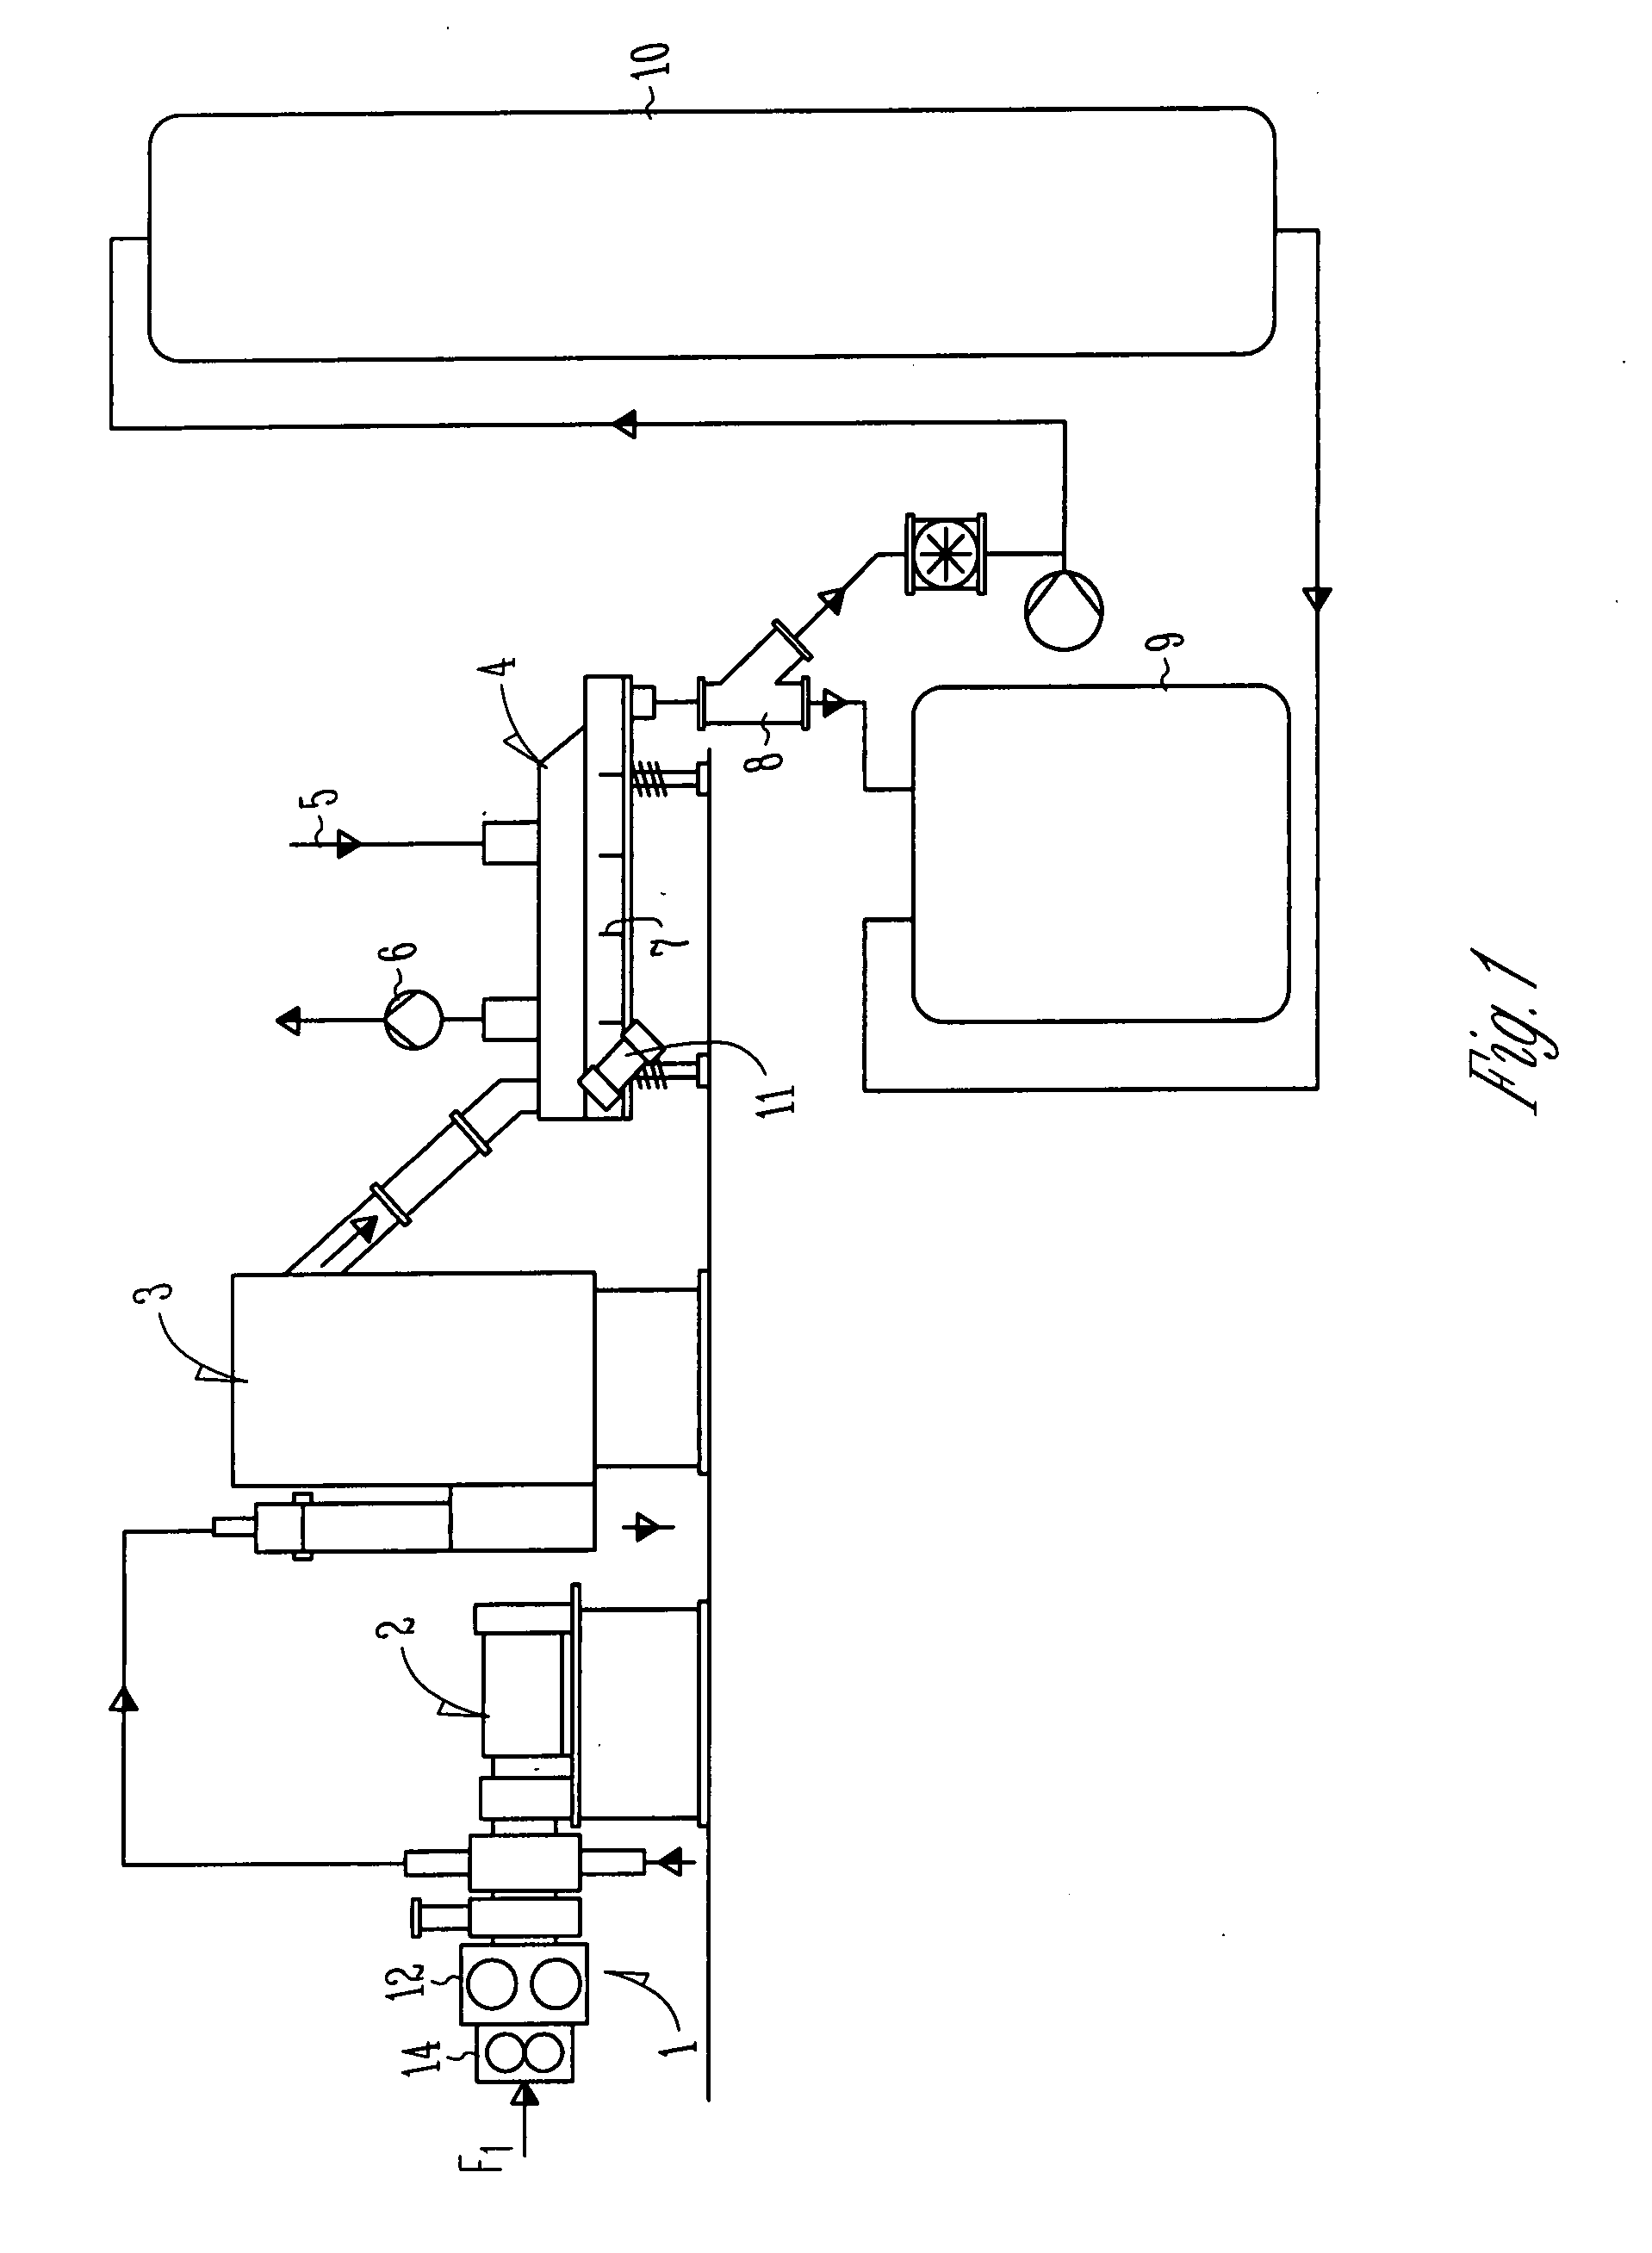 Method and apparatus for thermally processing polyester pellets and a corresponding pellet preparation